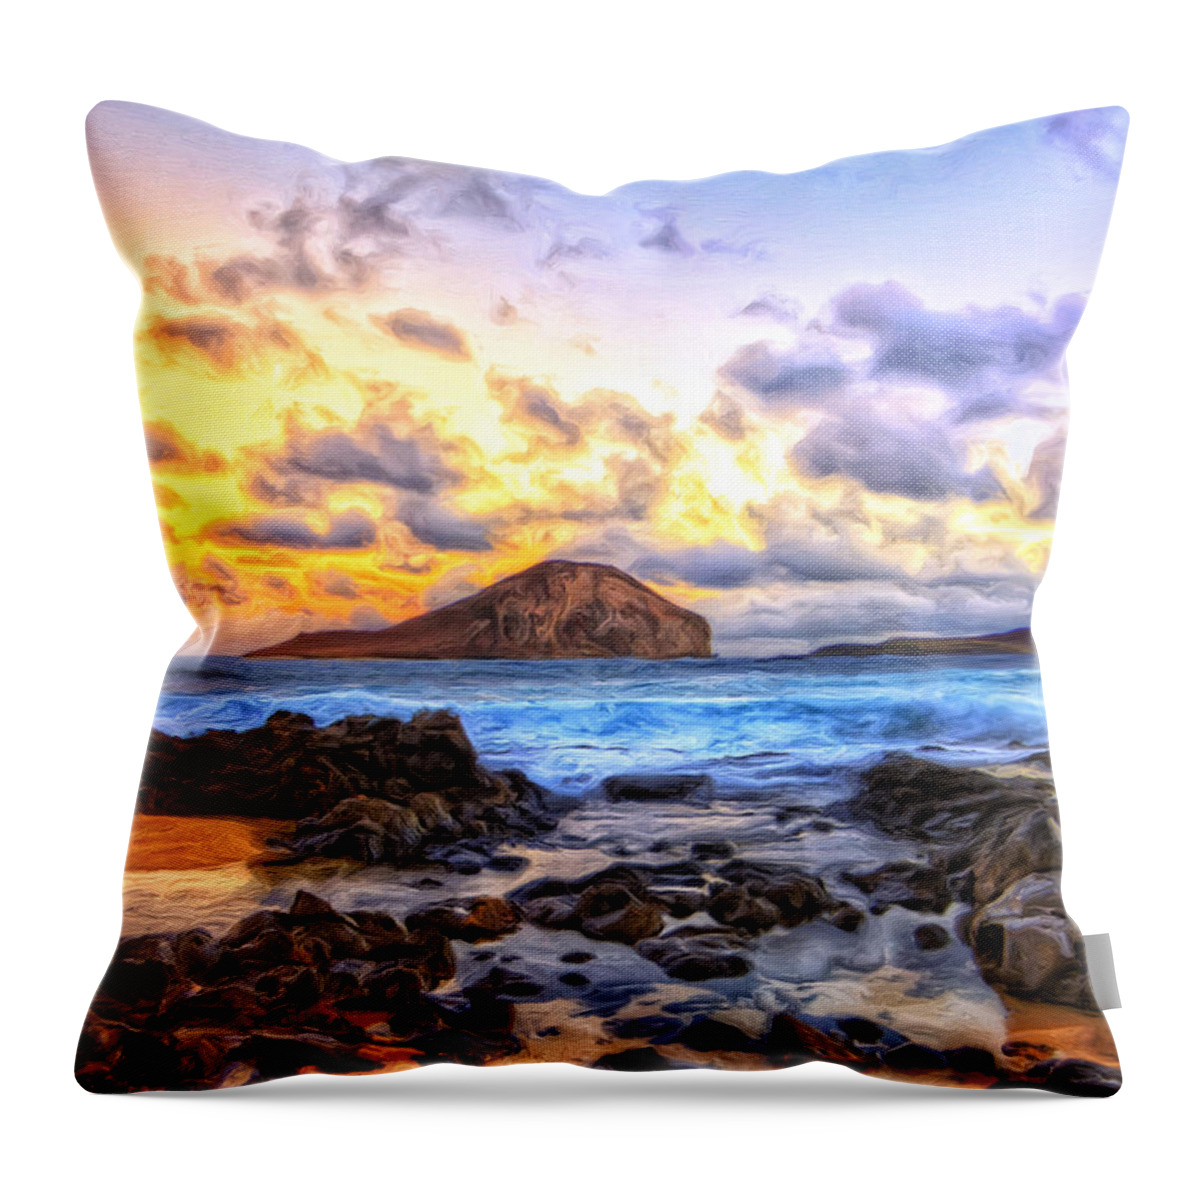 Morning Throw Pillow featuring the painting Morning at Makapuu by Dominic Piperata